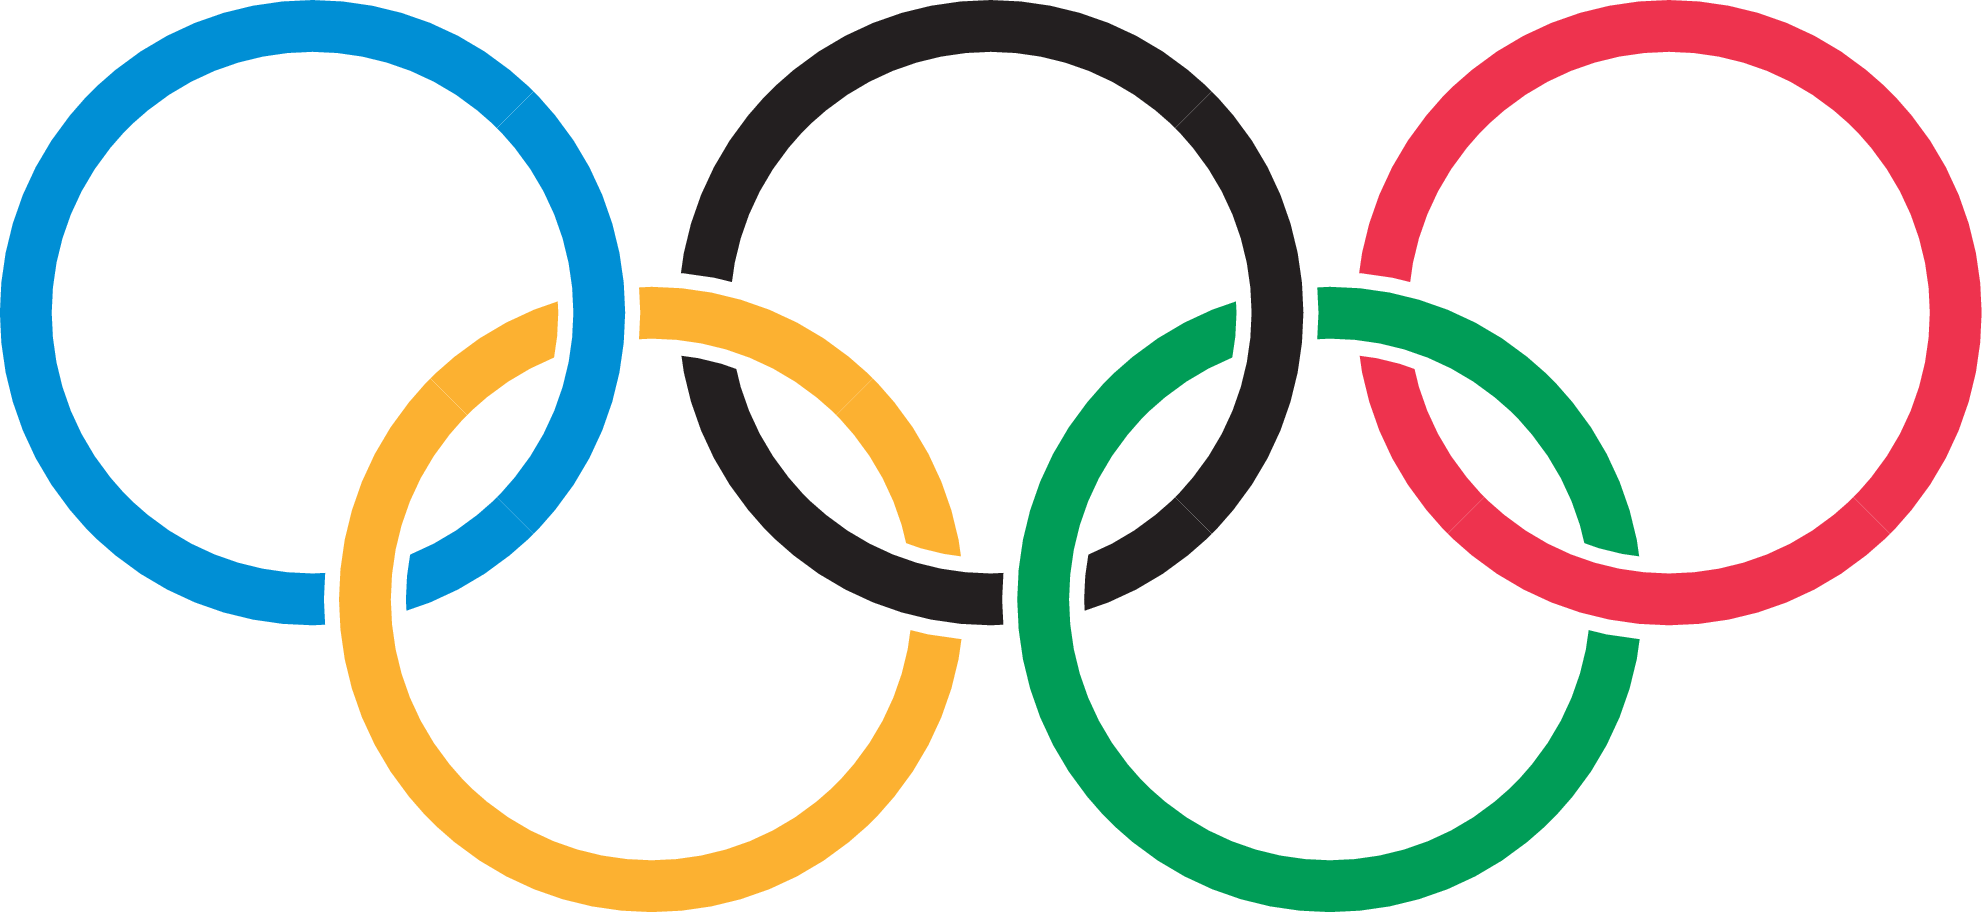 Olympic Circle Logo - popularity contest Games Logo Style Edition